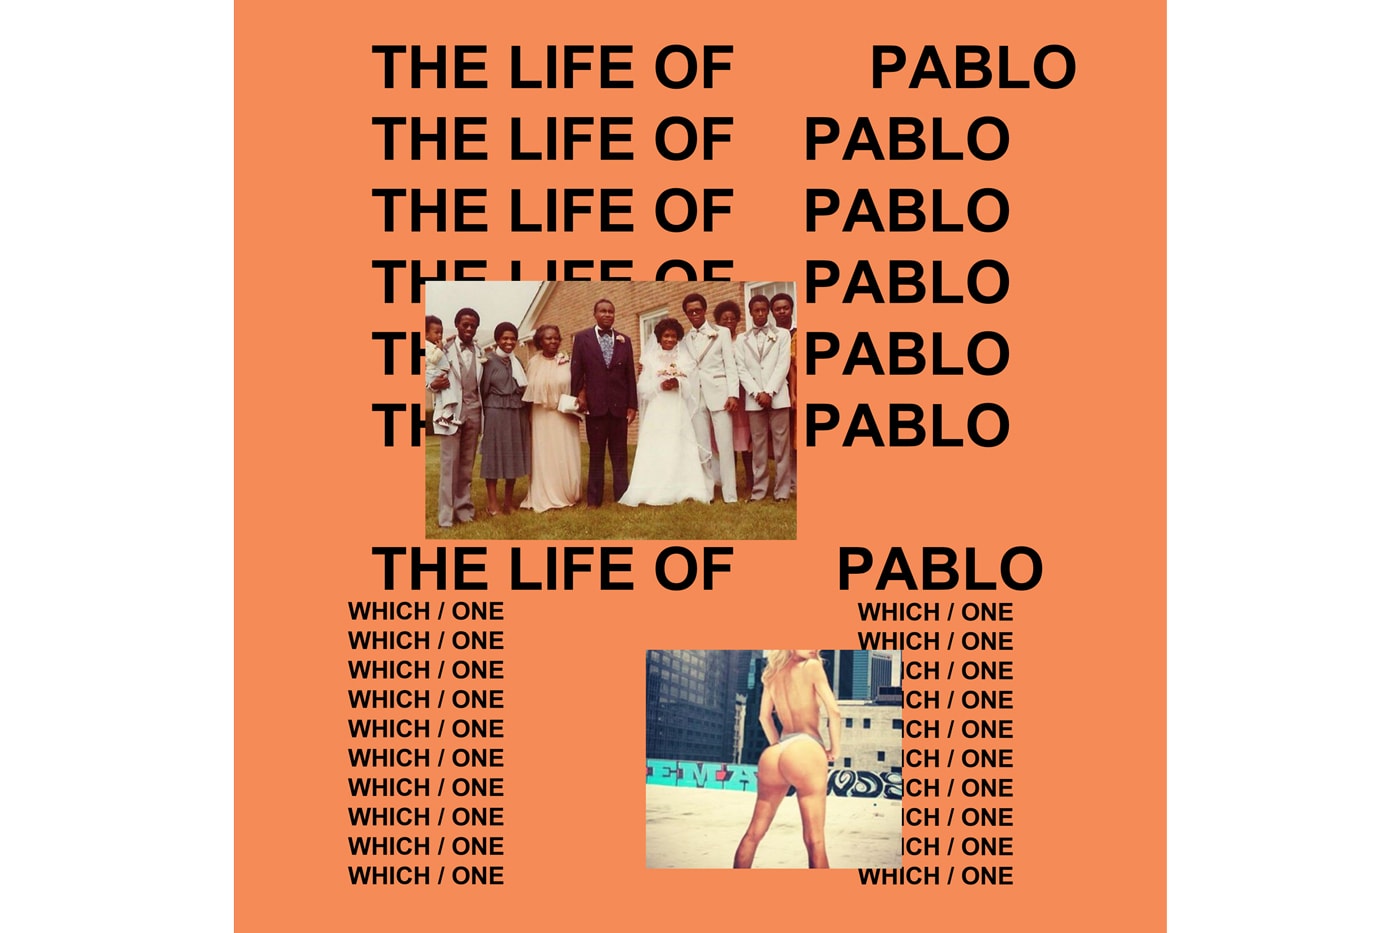 Kanye West Reveals Final Release Date of 'The Life of Pablo'